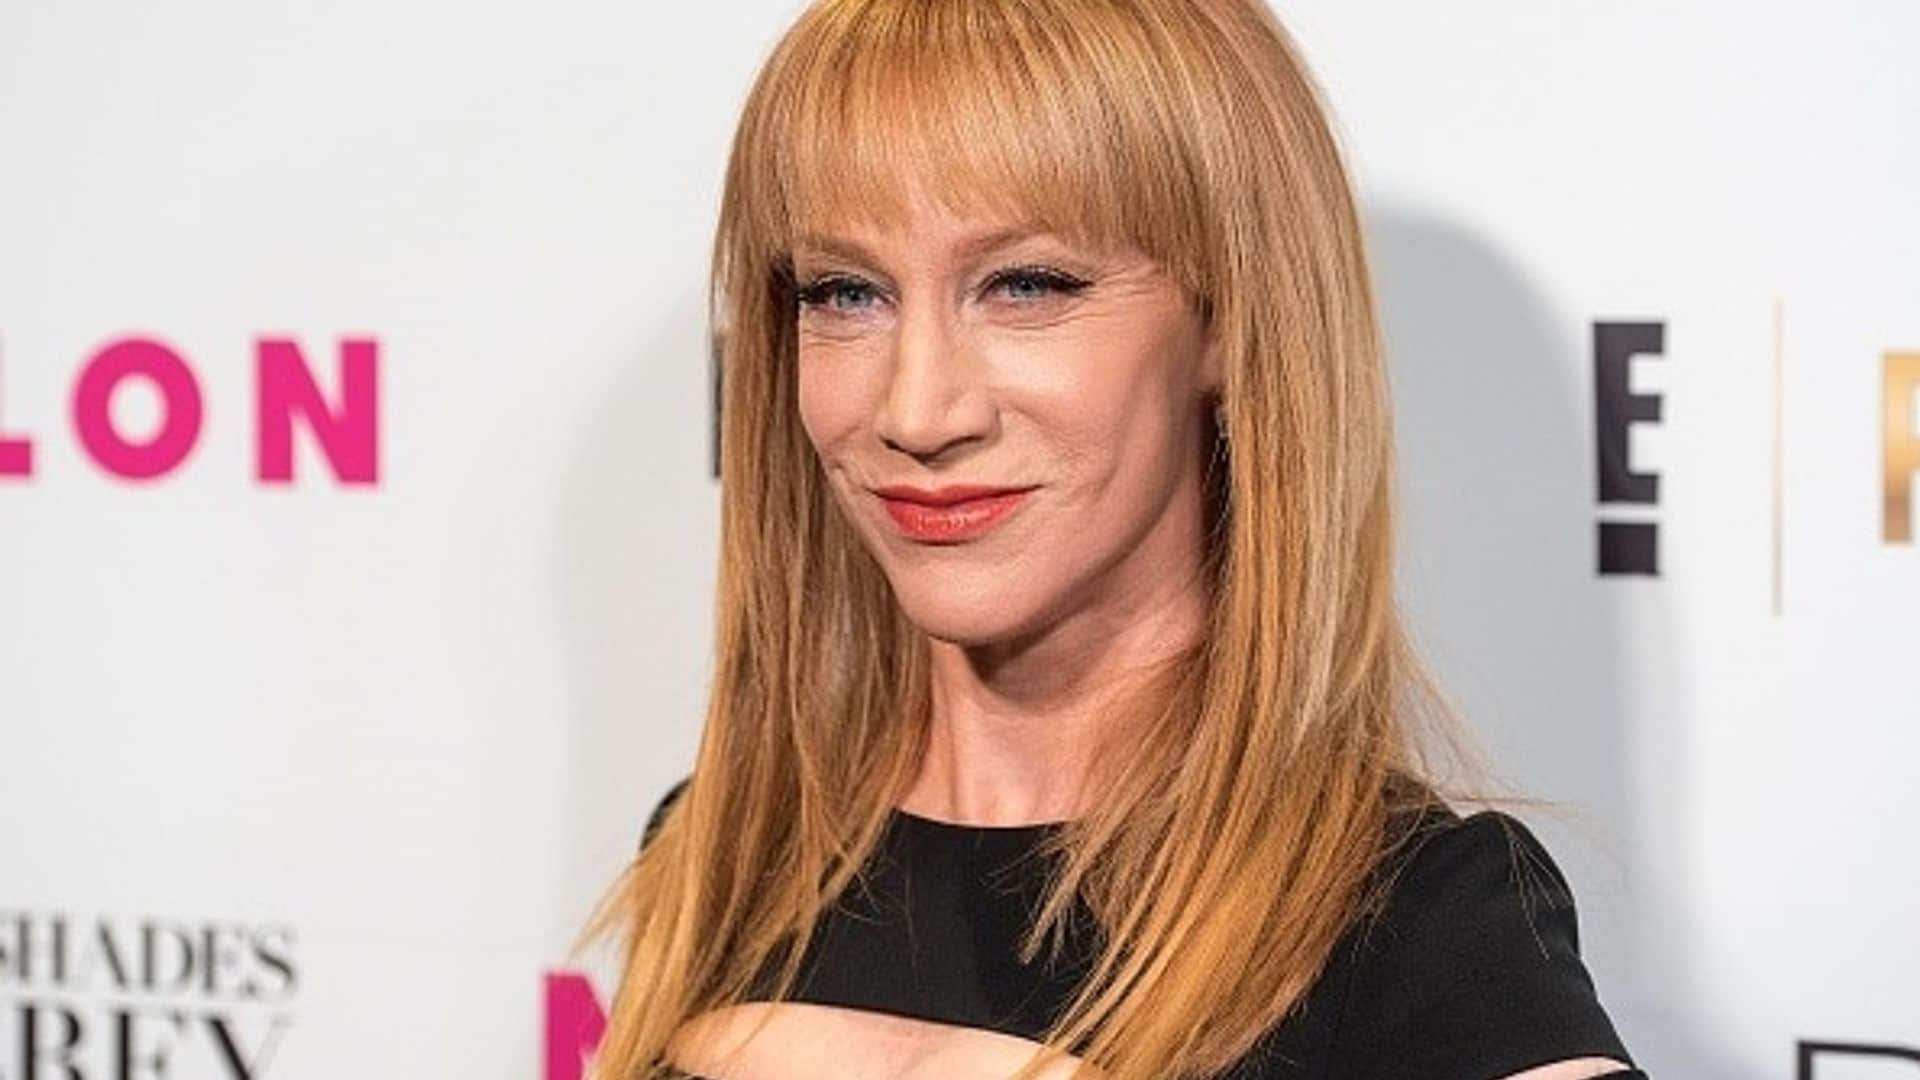 Kathy Griffin on Bruce Jenner's transition: 'This is just the beginning'